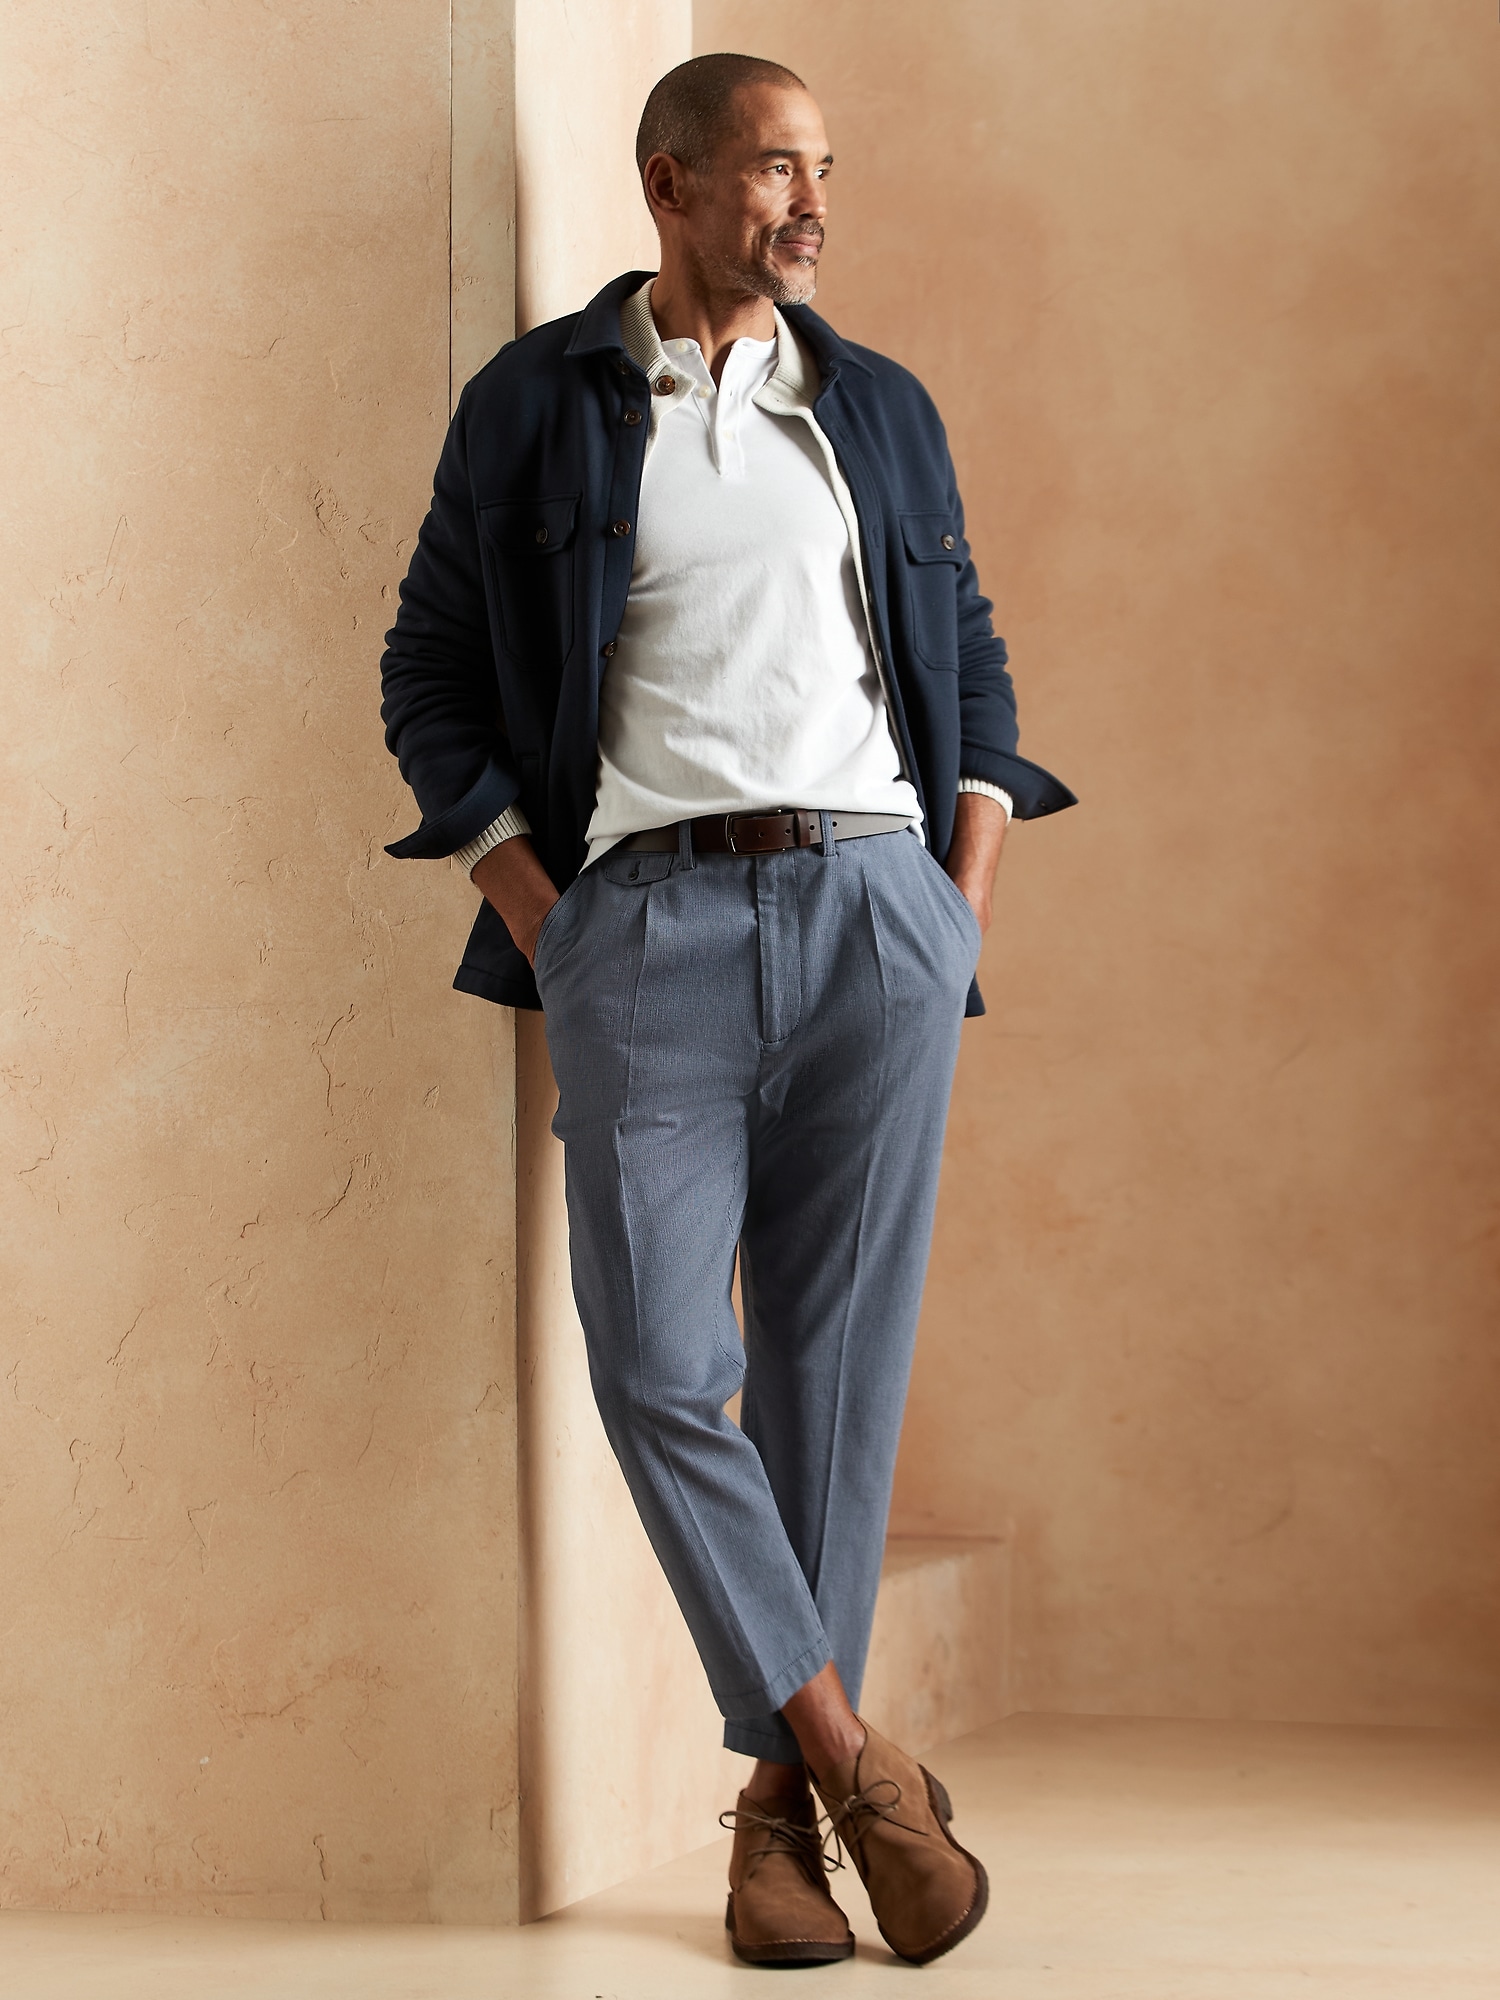 Relaxed Tapered Pant